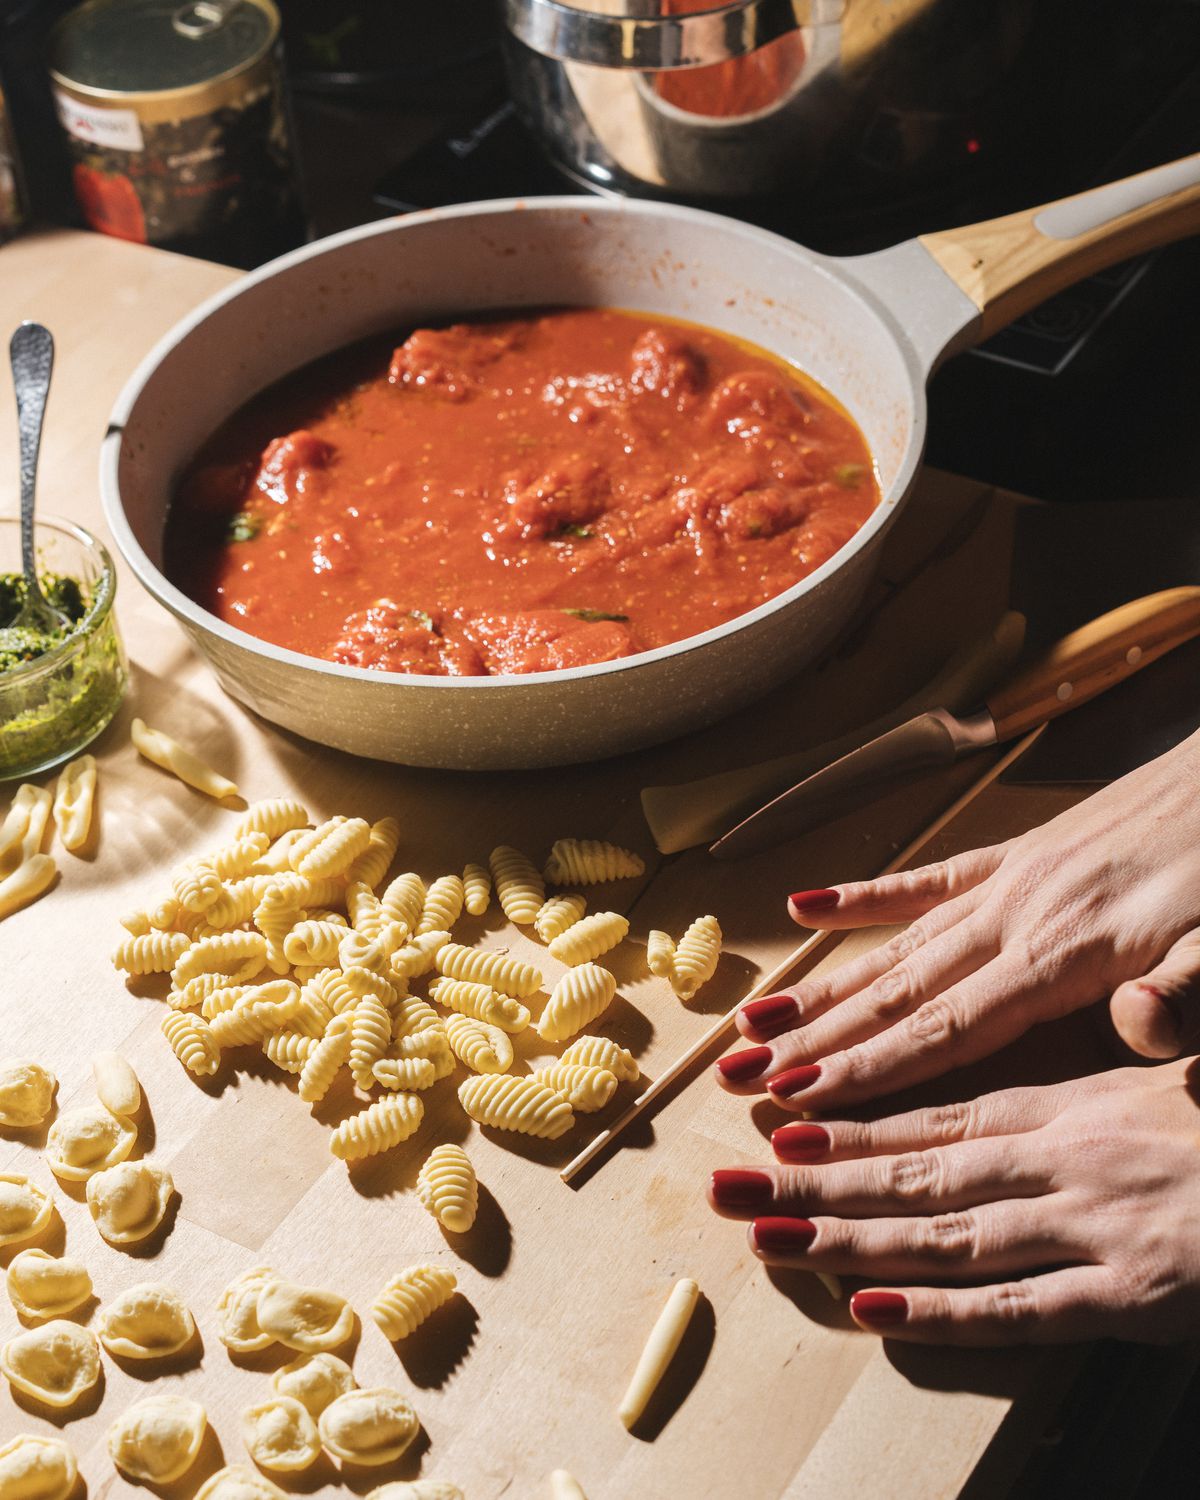 Two hands with red nail polish roll pasta with a pot with red sauce on the side.